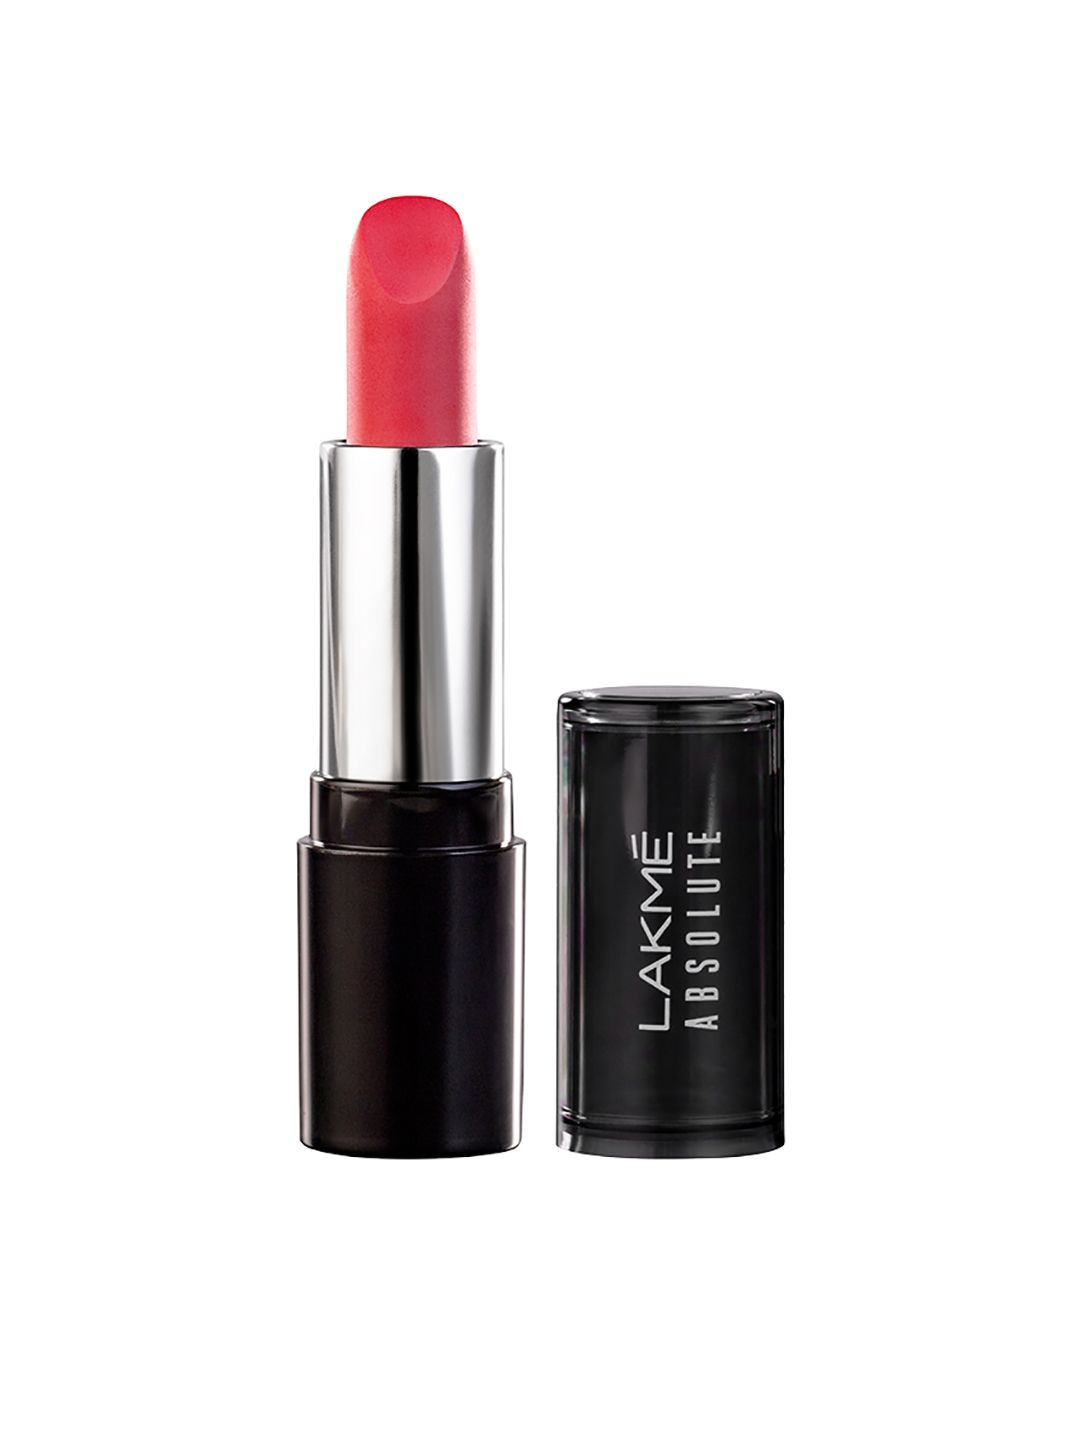 Lakme Absolute Matte Revolution Lip Color - Envious Red 102 3.5 g Price in India